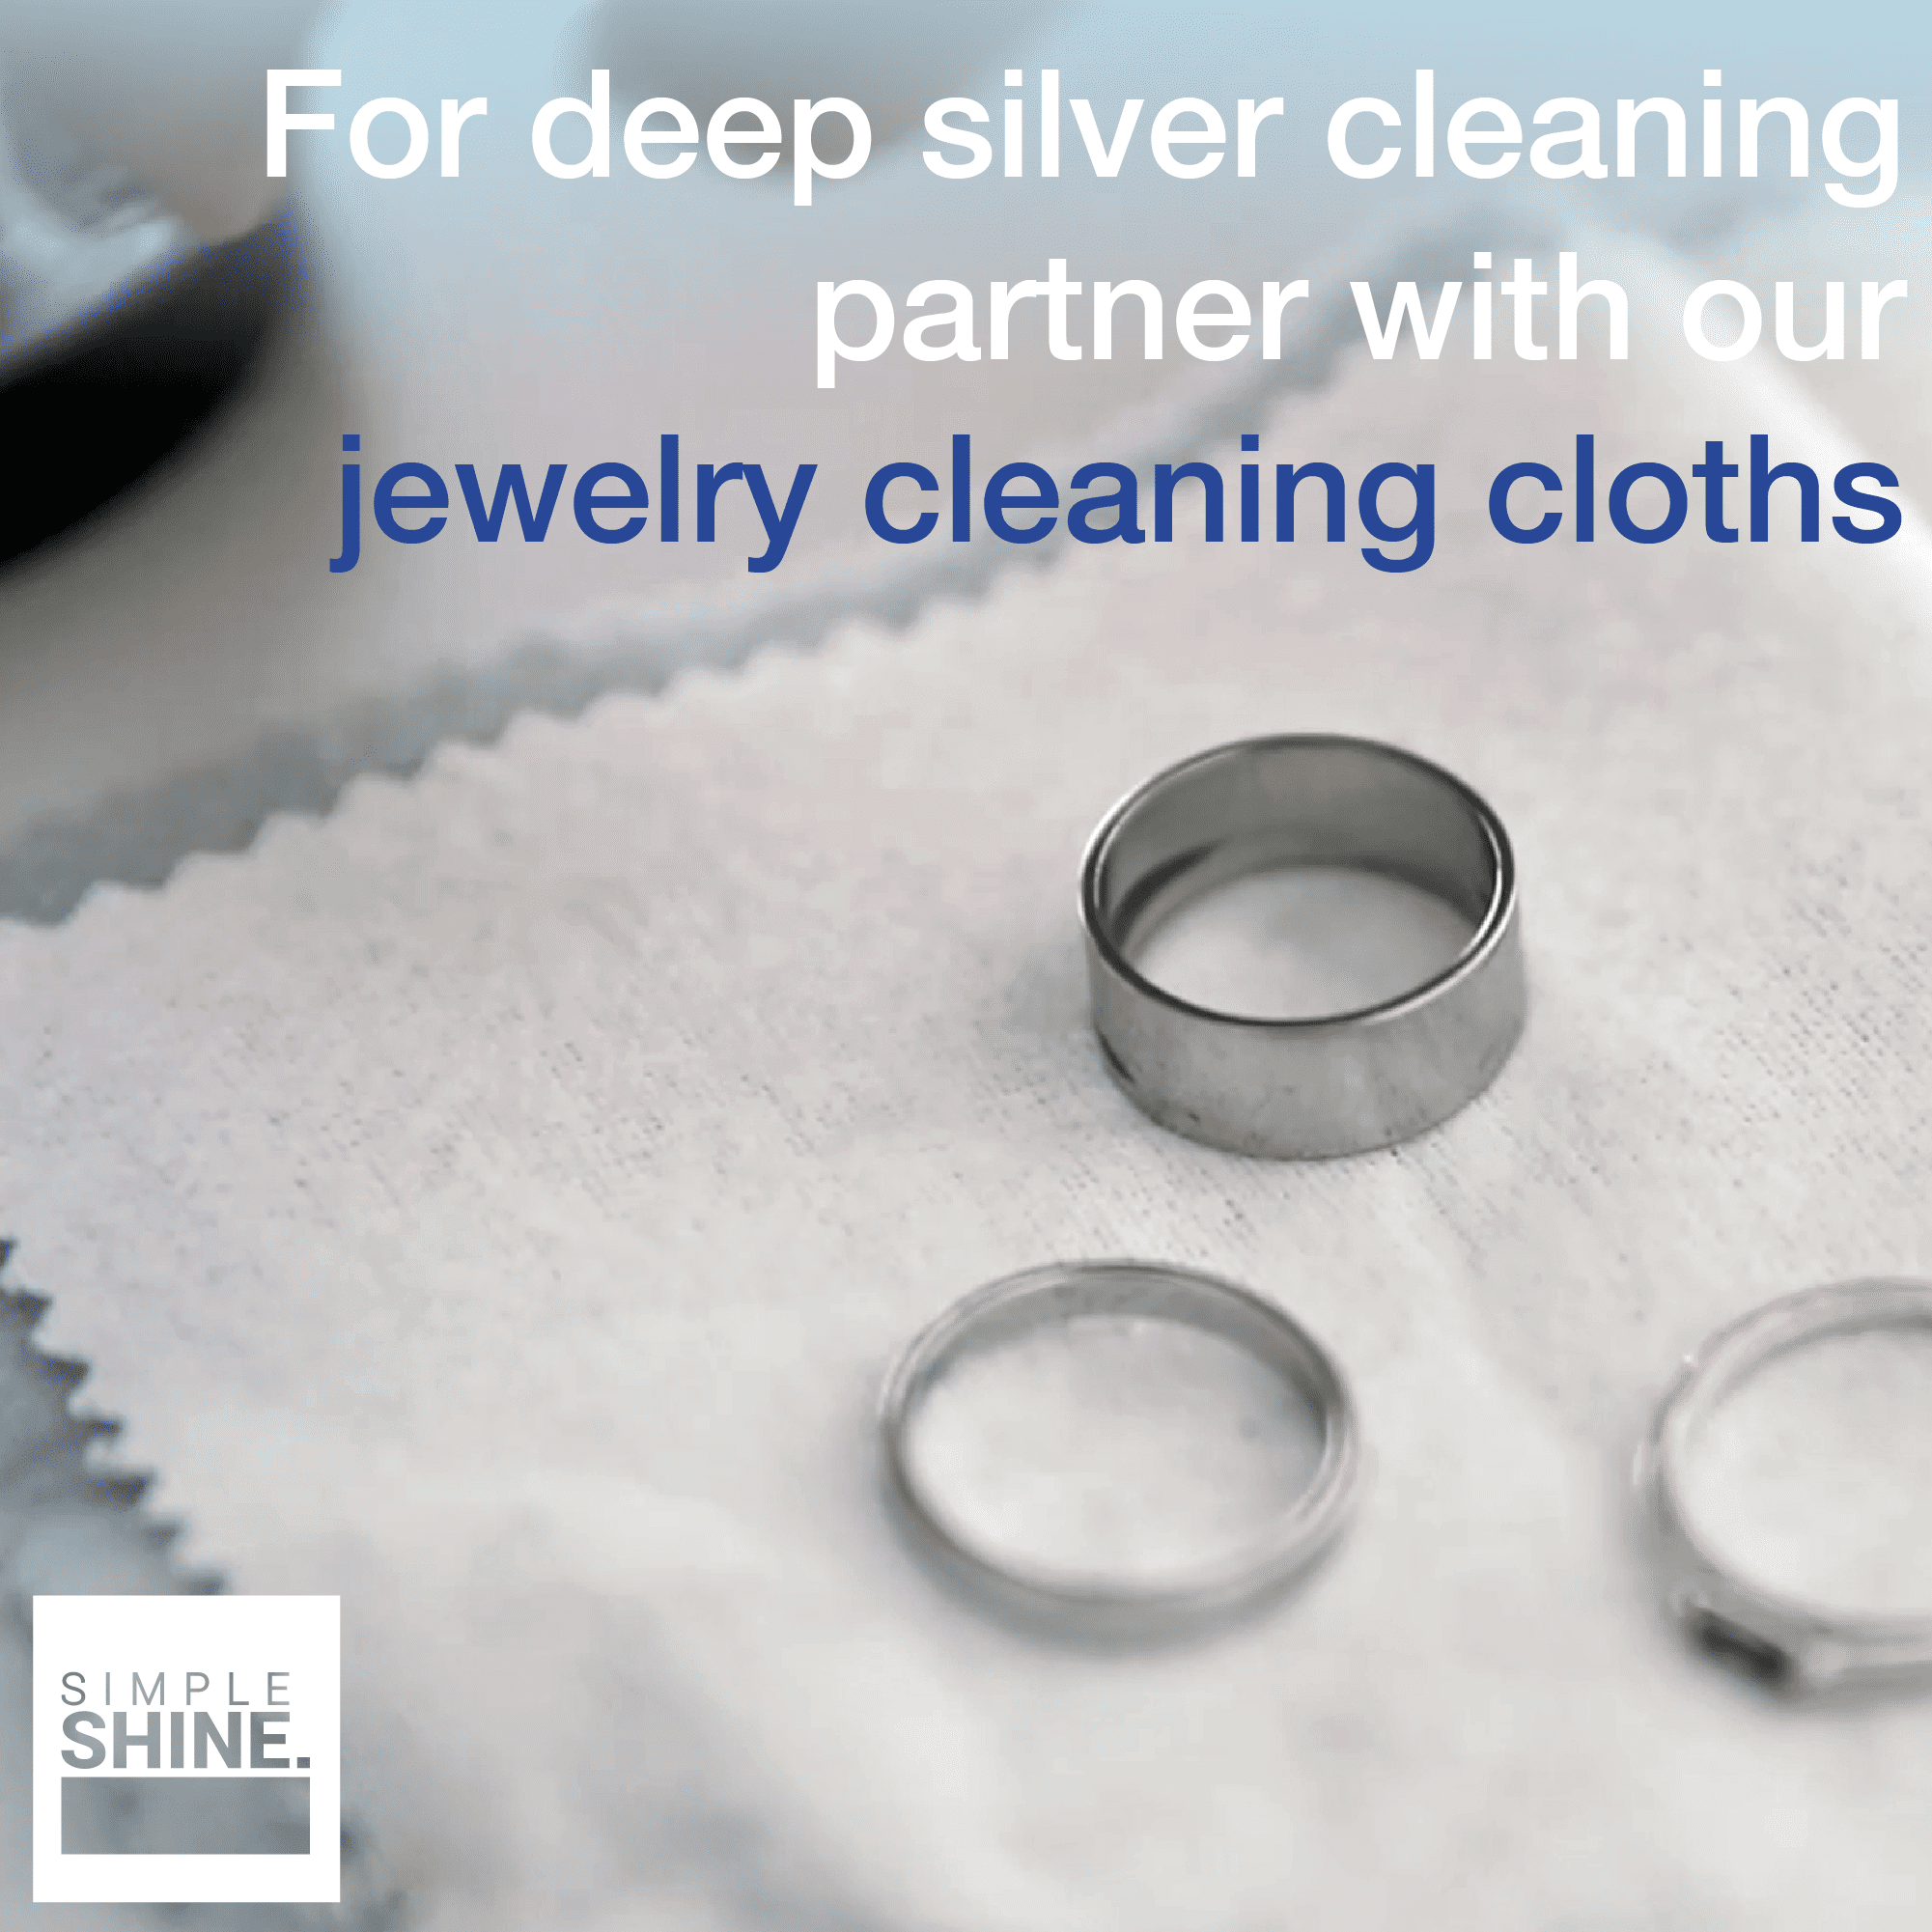 How to Clean Silver Jewelry So It Shines